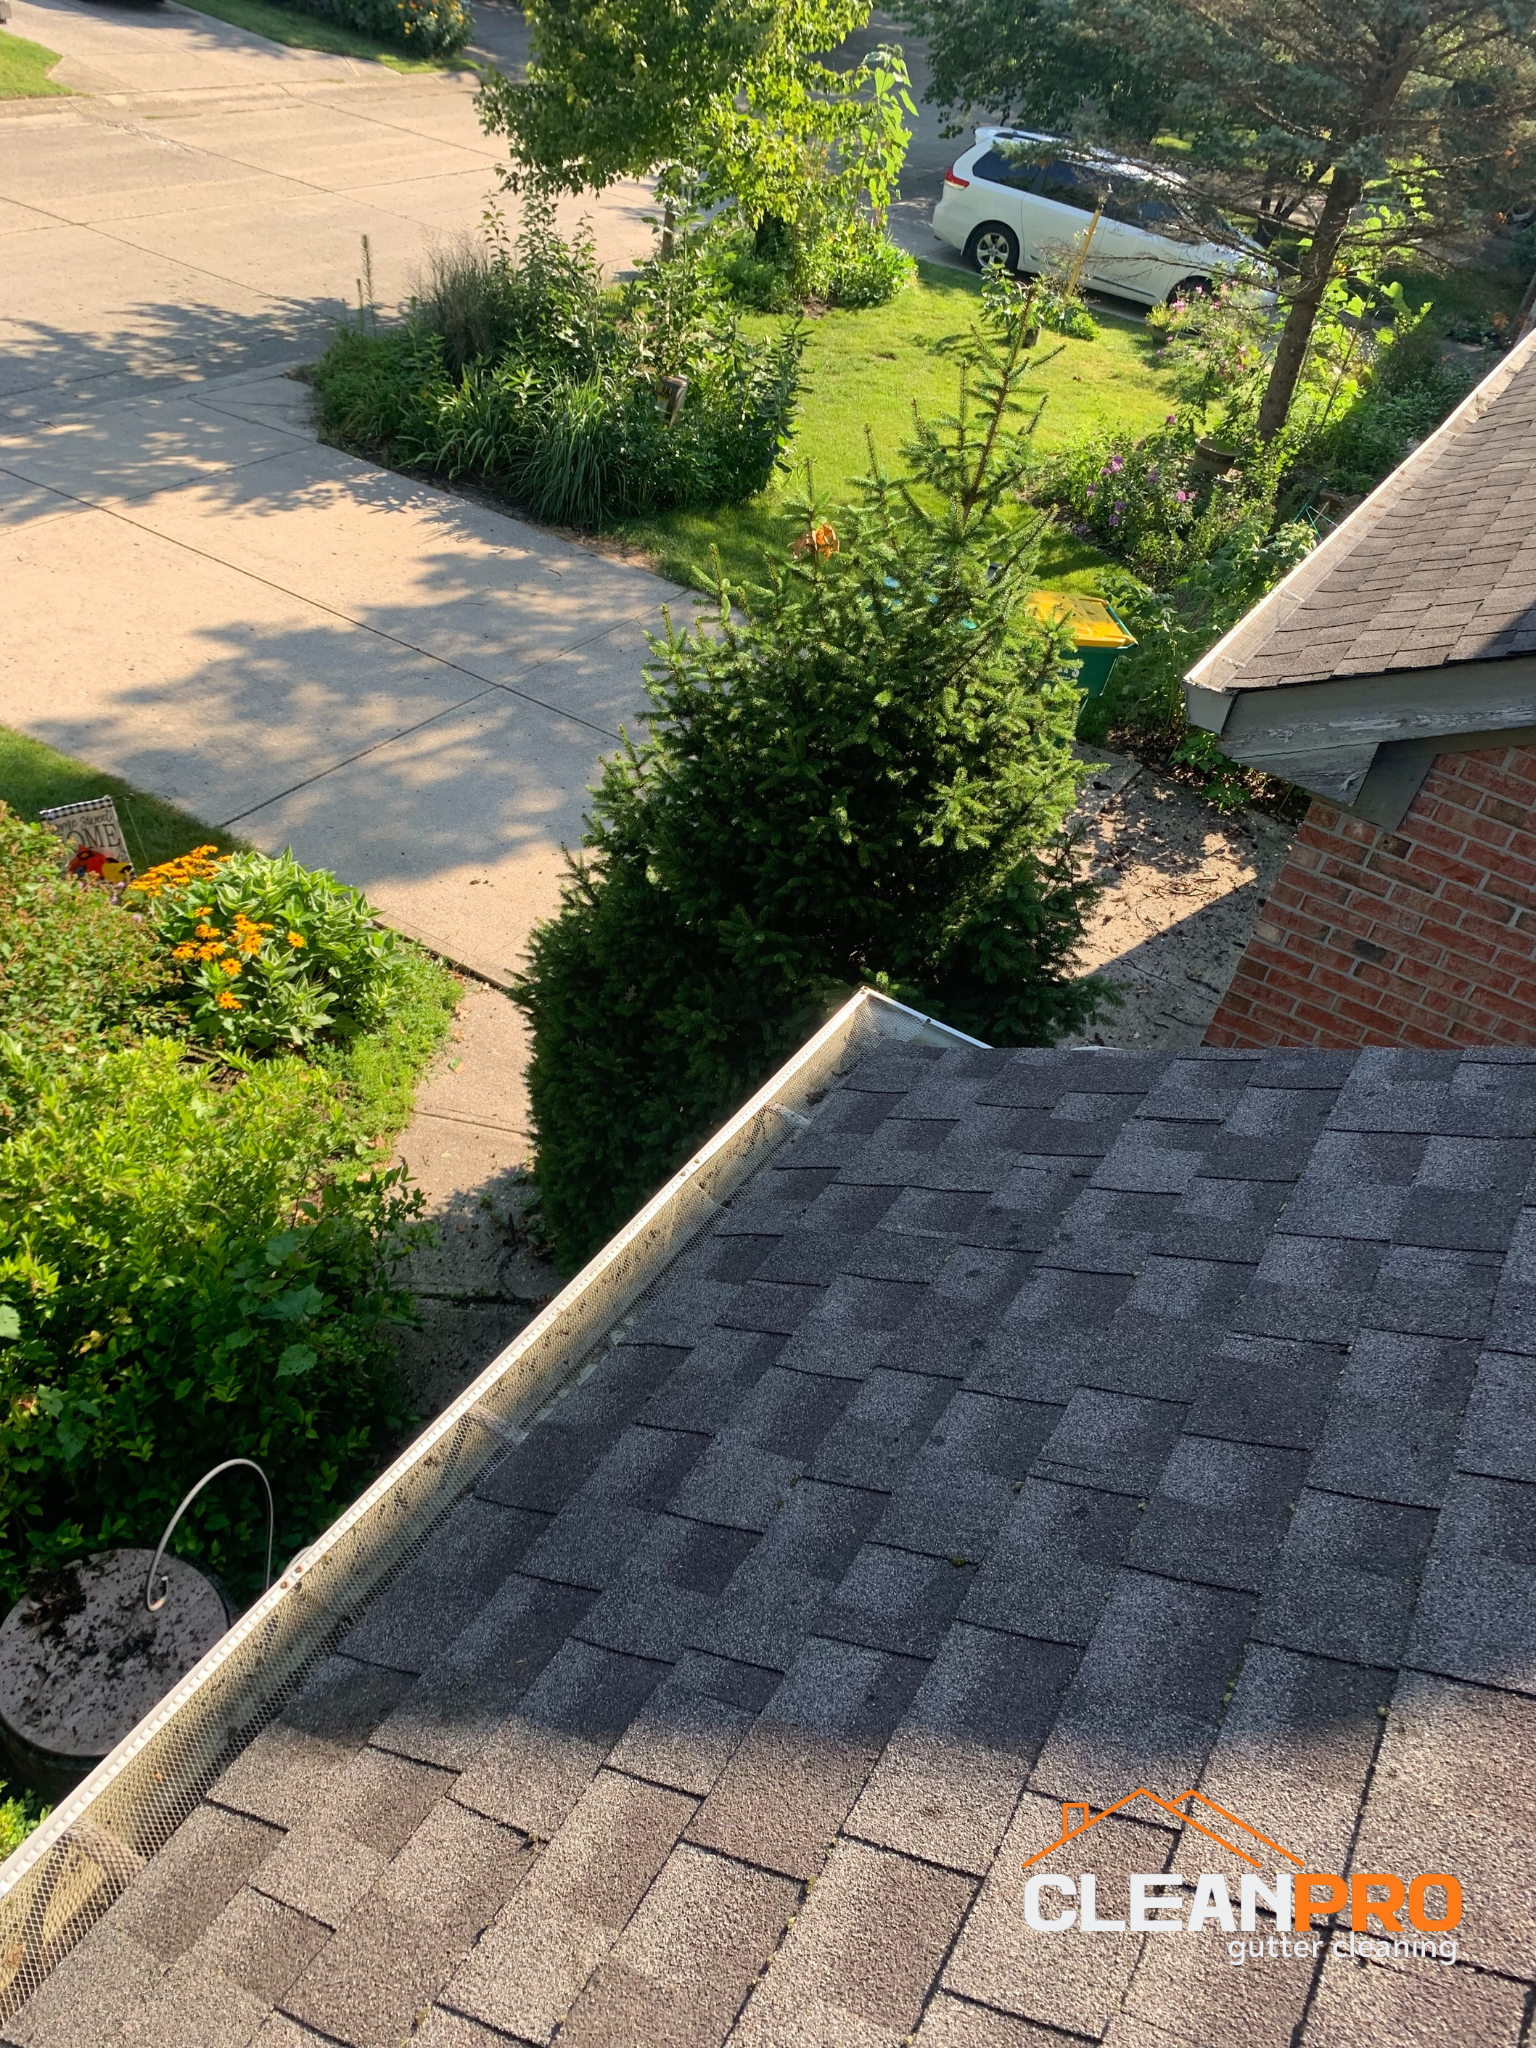 Quality Gutter Cleaning in Boulder CO